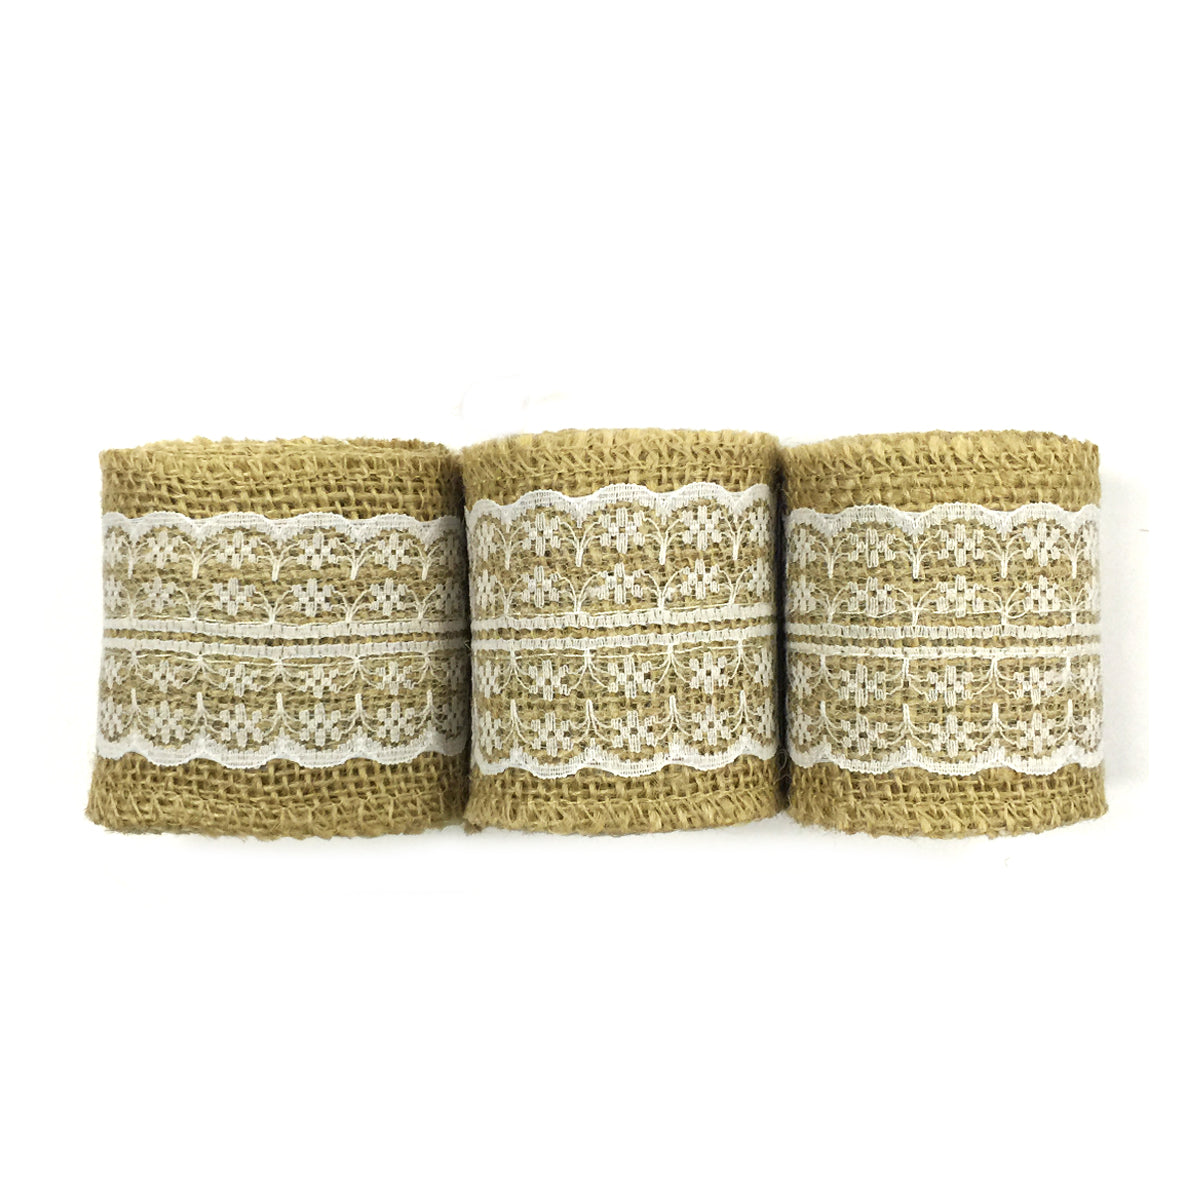 Wrapables Hessian Burlap with Lace Ribbon 2.5 Inch Width x 2 Yards Length (Set of 6)